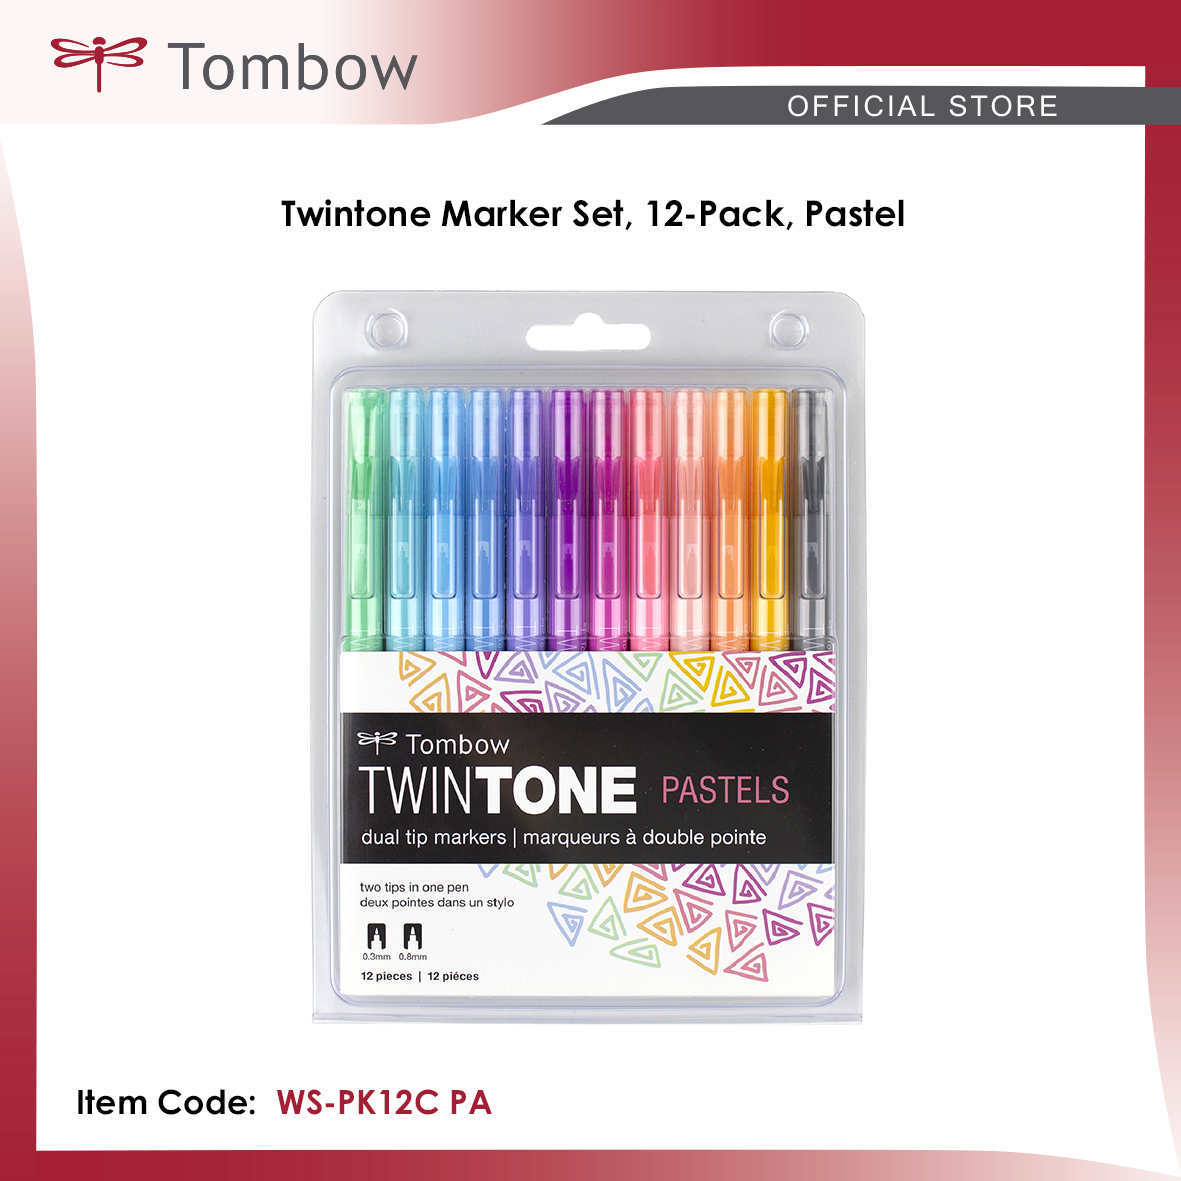 TwinTone Pastel Markers